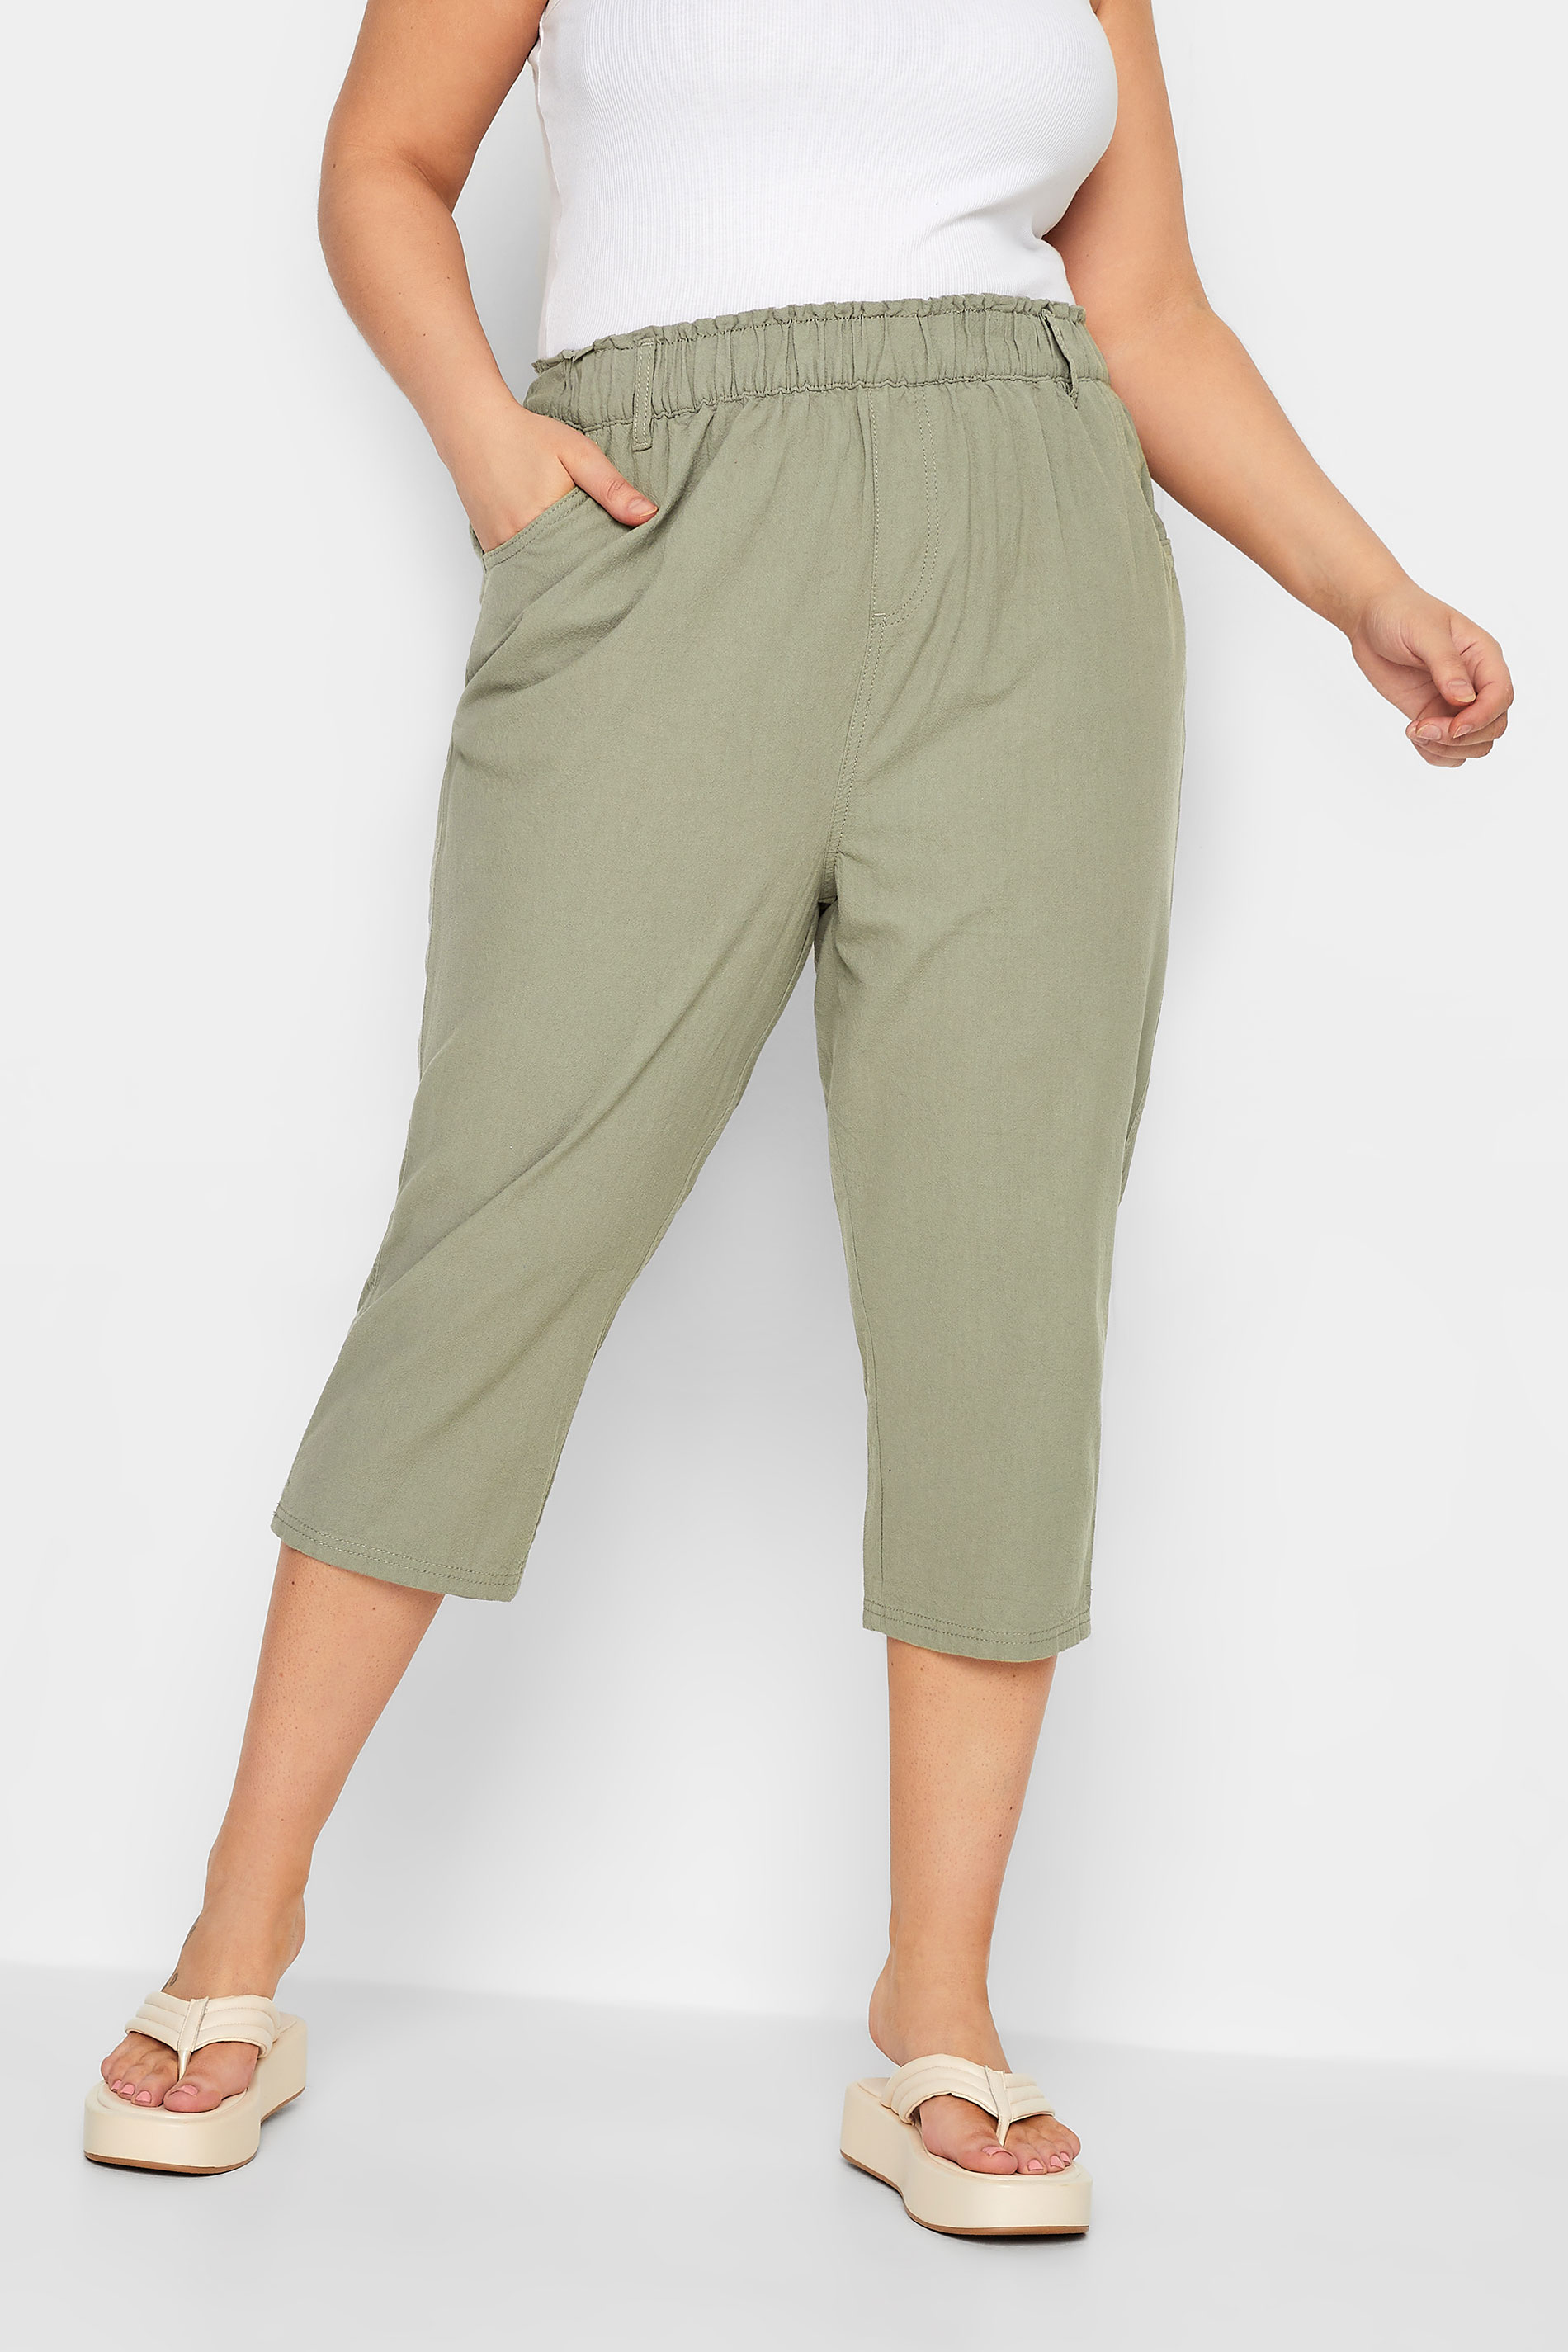 Women's Summer Comfy Cotton Linen Cropped Trousers High Rise Outdoor  Streetwear Plus Size Pants Ladies Baggy Pants Casual Solid Color Elastic  Loose Pants Straight Wide Leg Trousers with Pocket : Amazon.co.uk: Fashion